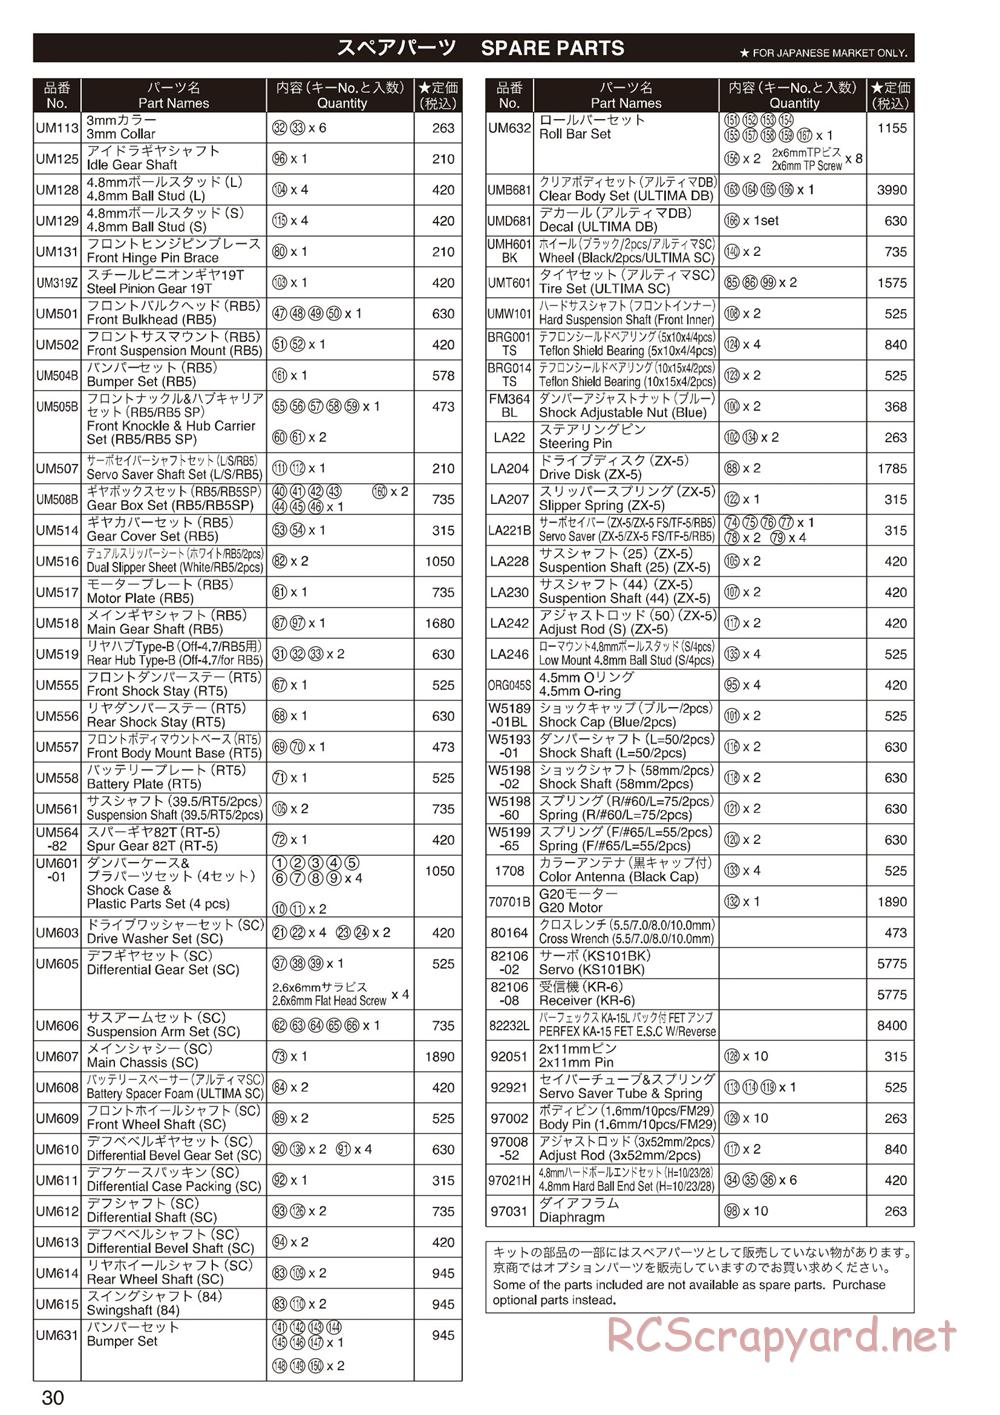 Kyosho - Ultima-DB - Parts List - Page 1